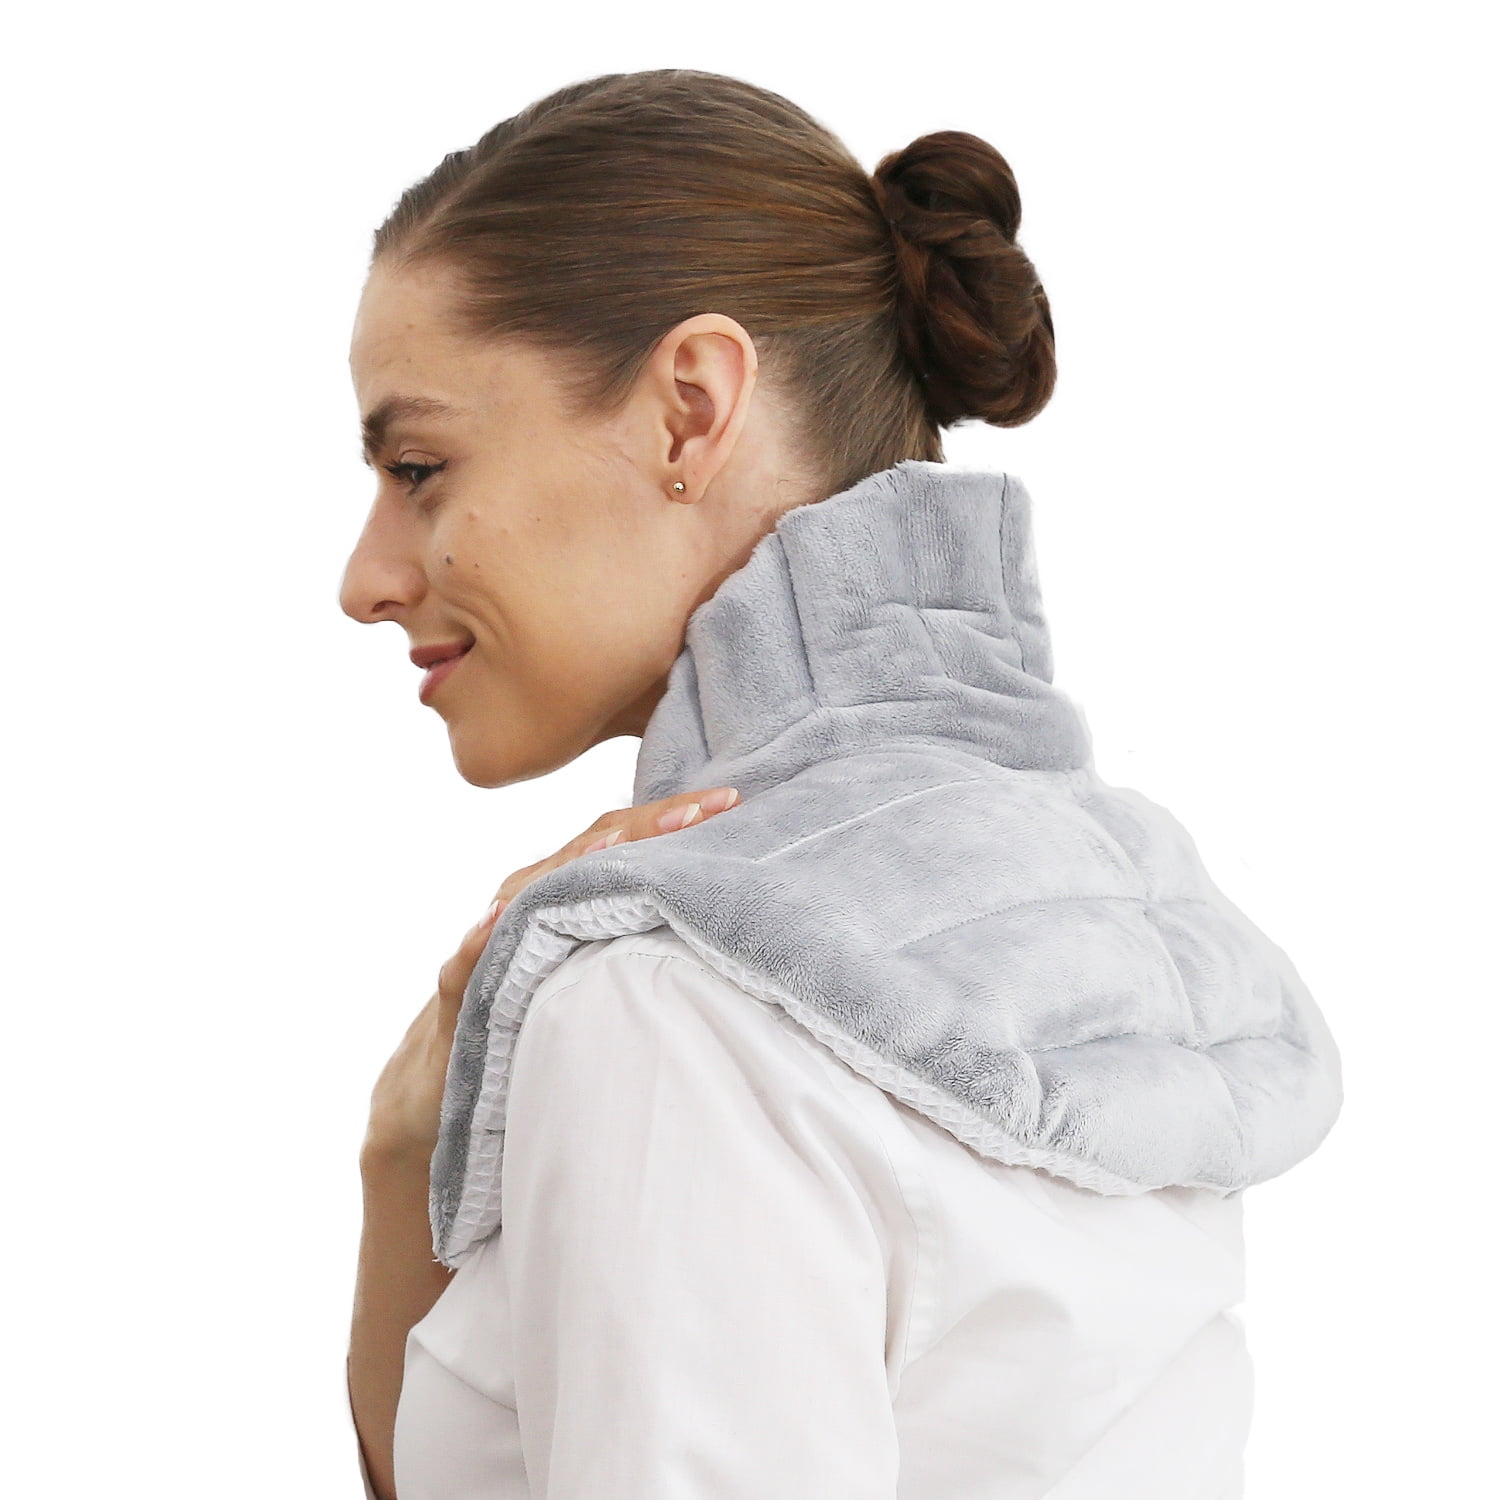 Heating Pad Solutions - Neck Buddy Plus - Microwave Heating Pad for ...